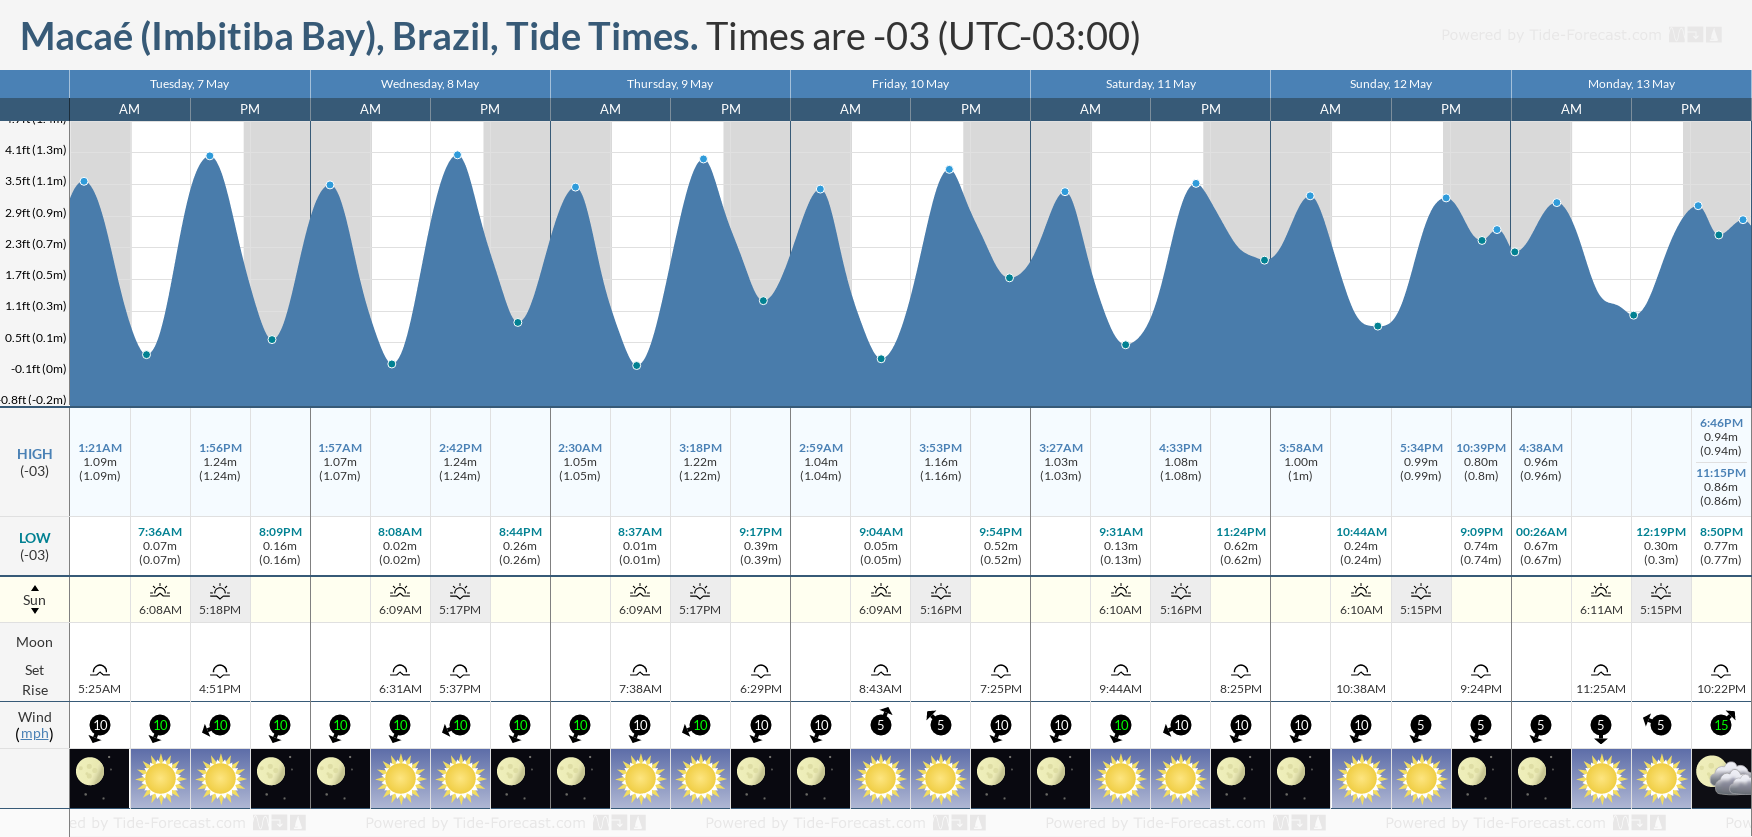 Macaé (Imbitiba Bay), Brazil Tide Chart including high and low tide tide times for the next 7 days